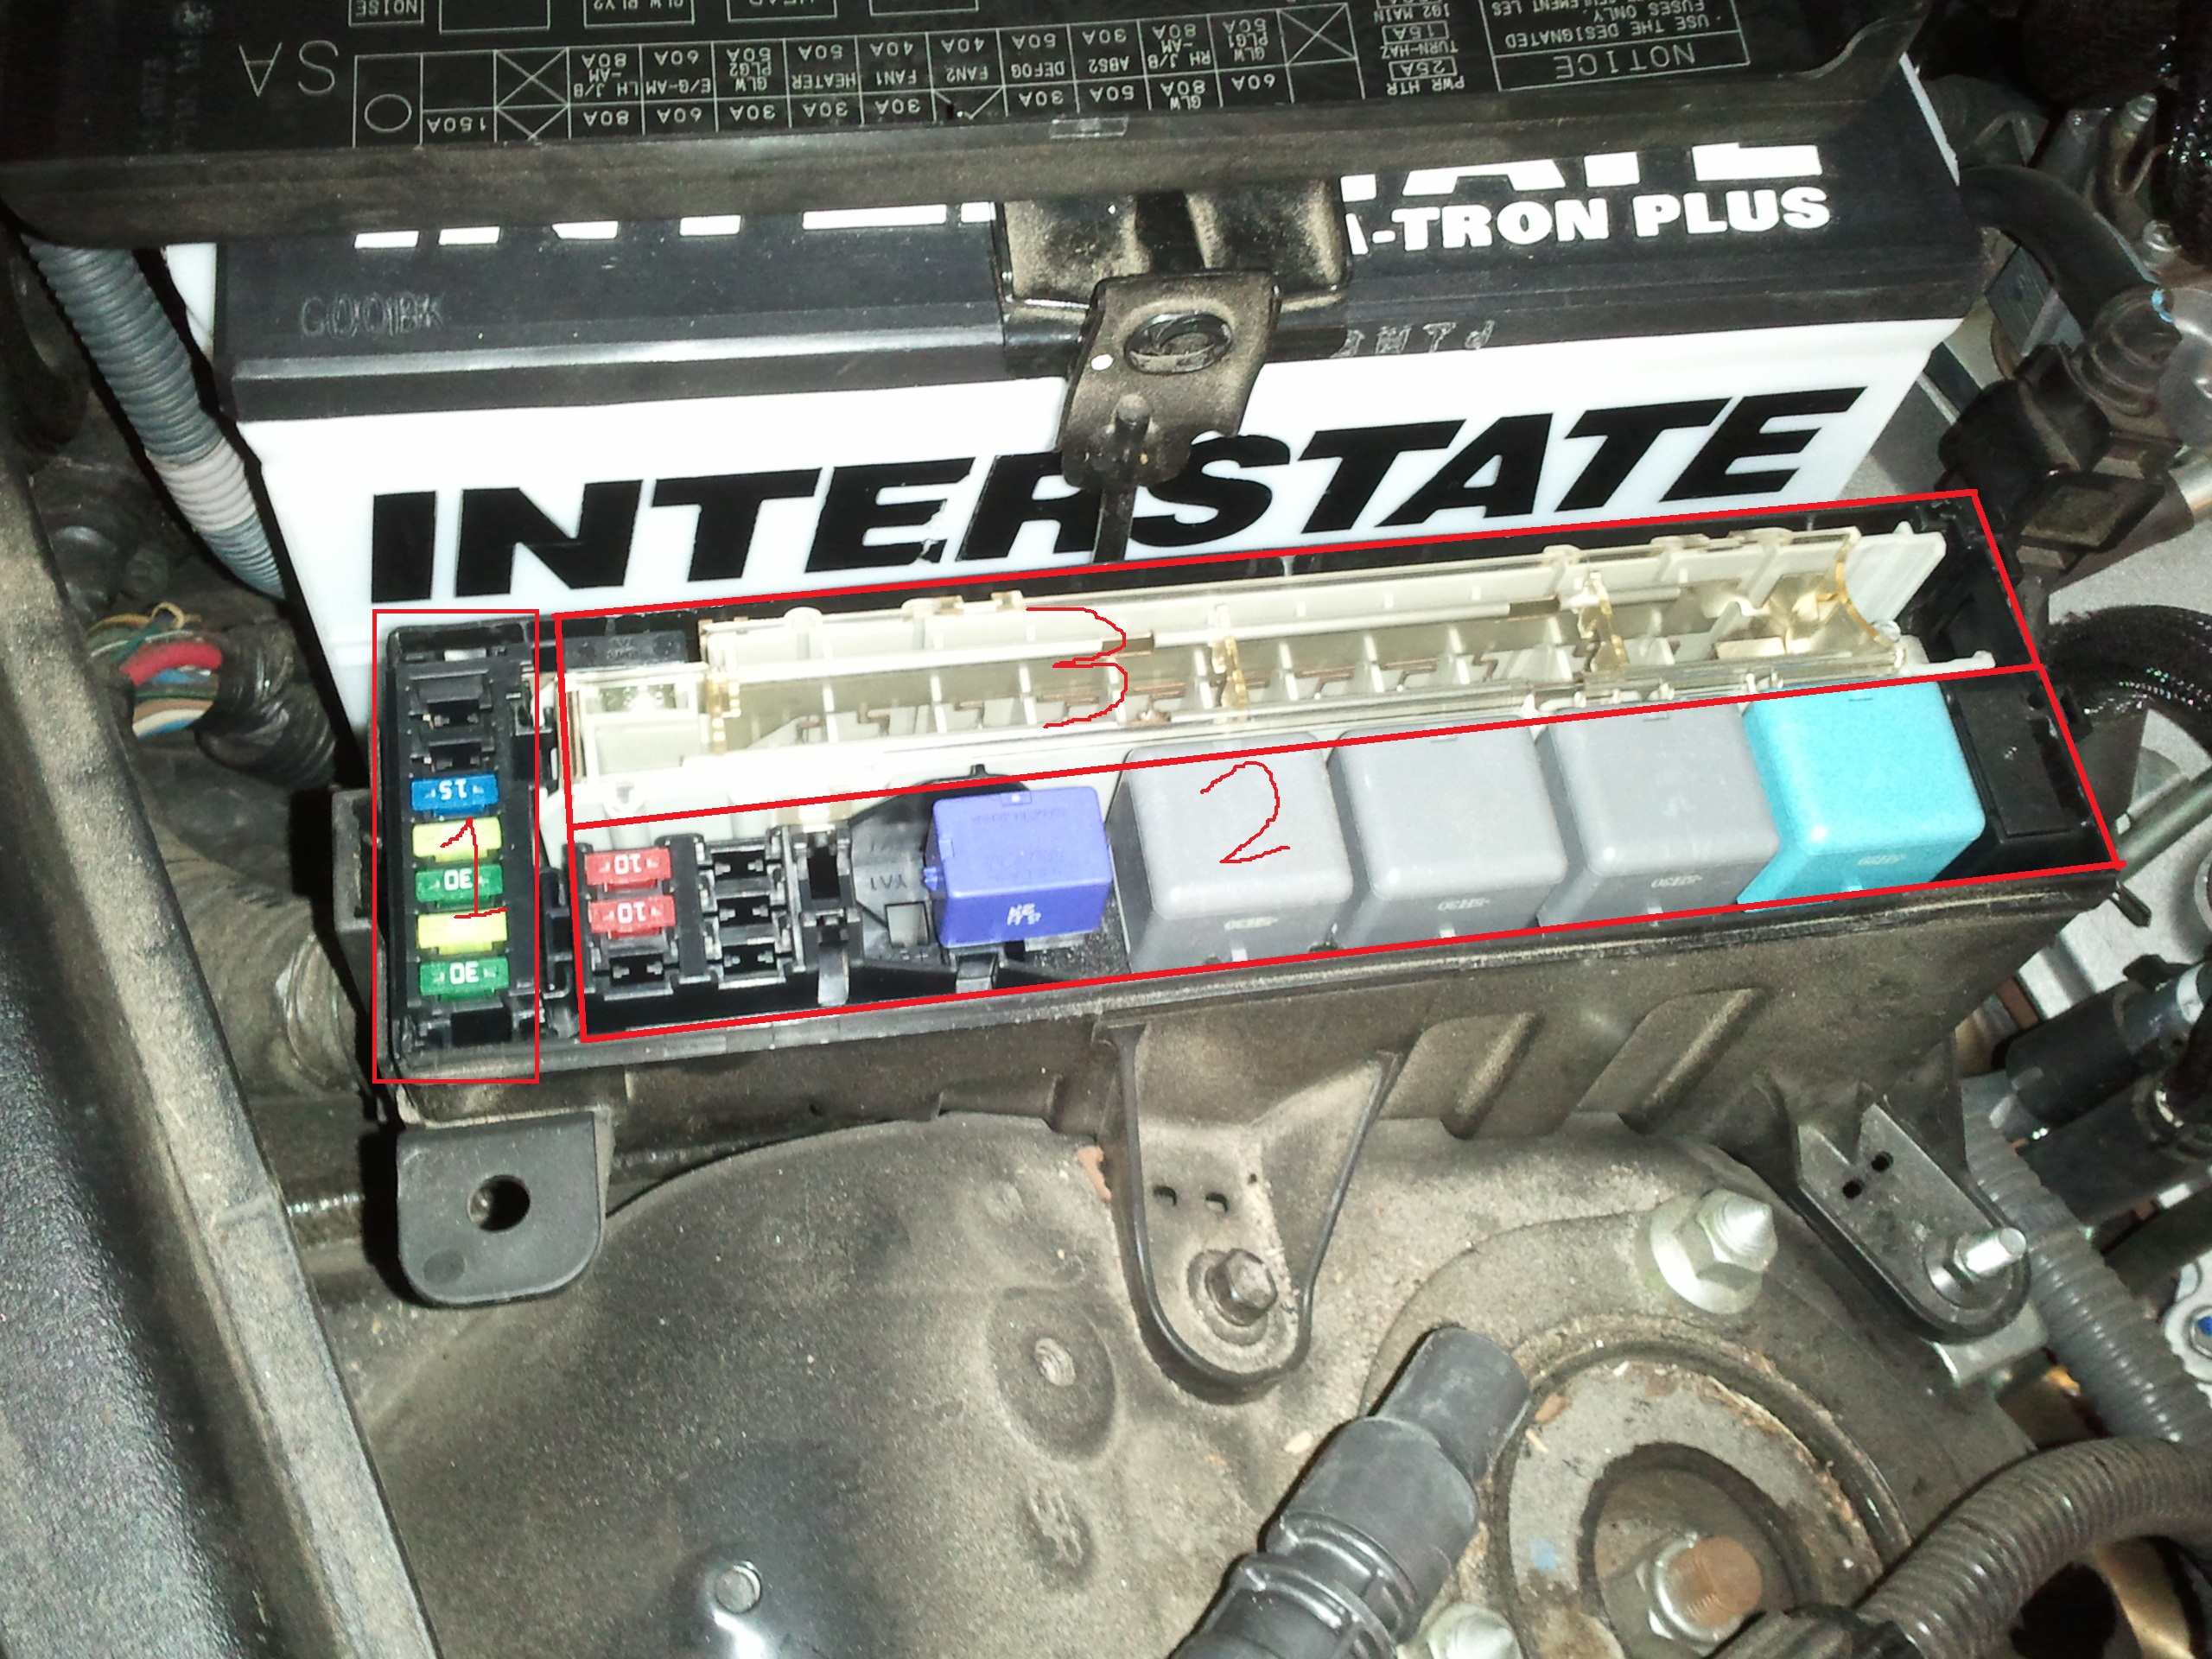 Blown ALT Fuse, Connected Battery Cables Wrong :( - Club ... 2005 lexus gx470 fuse box diagram 